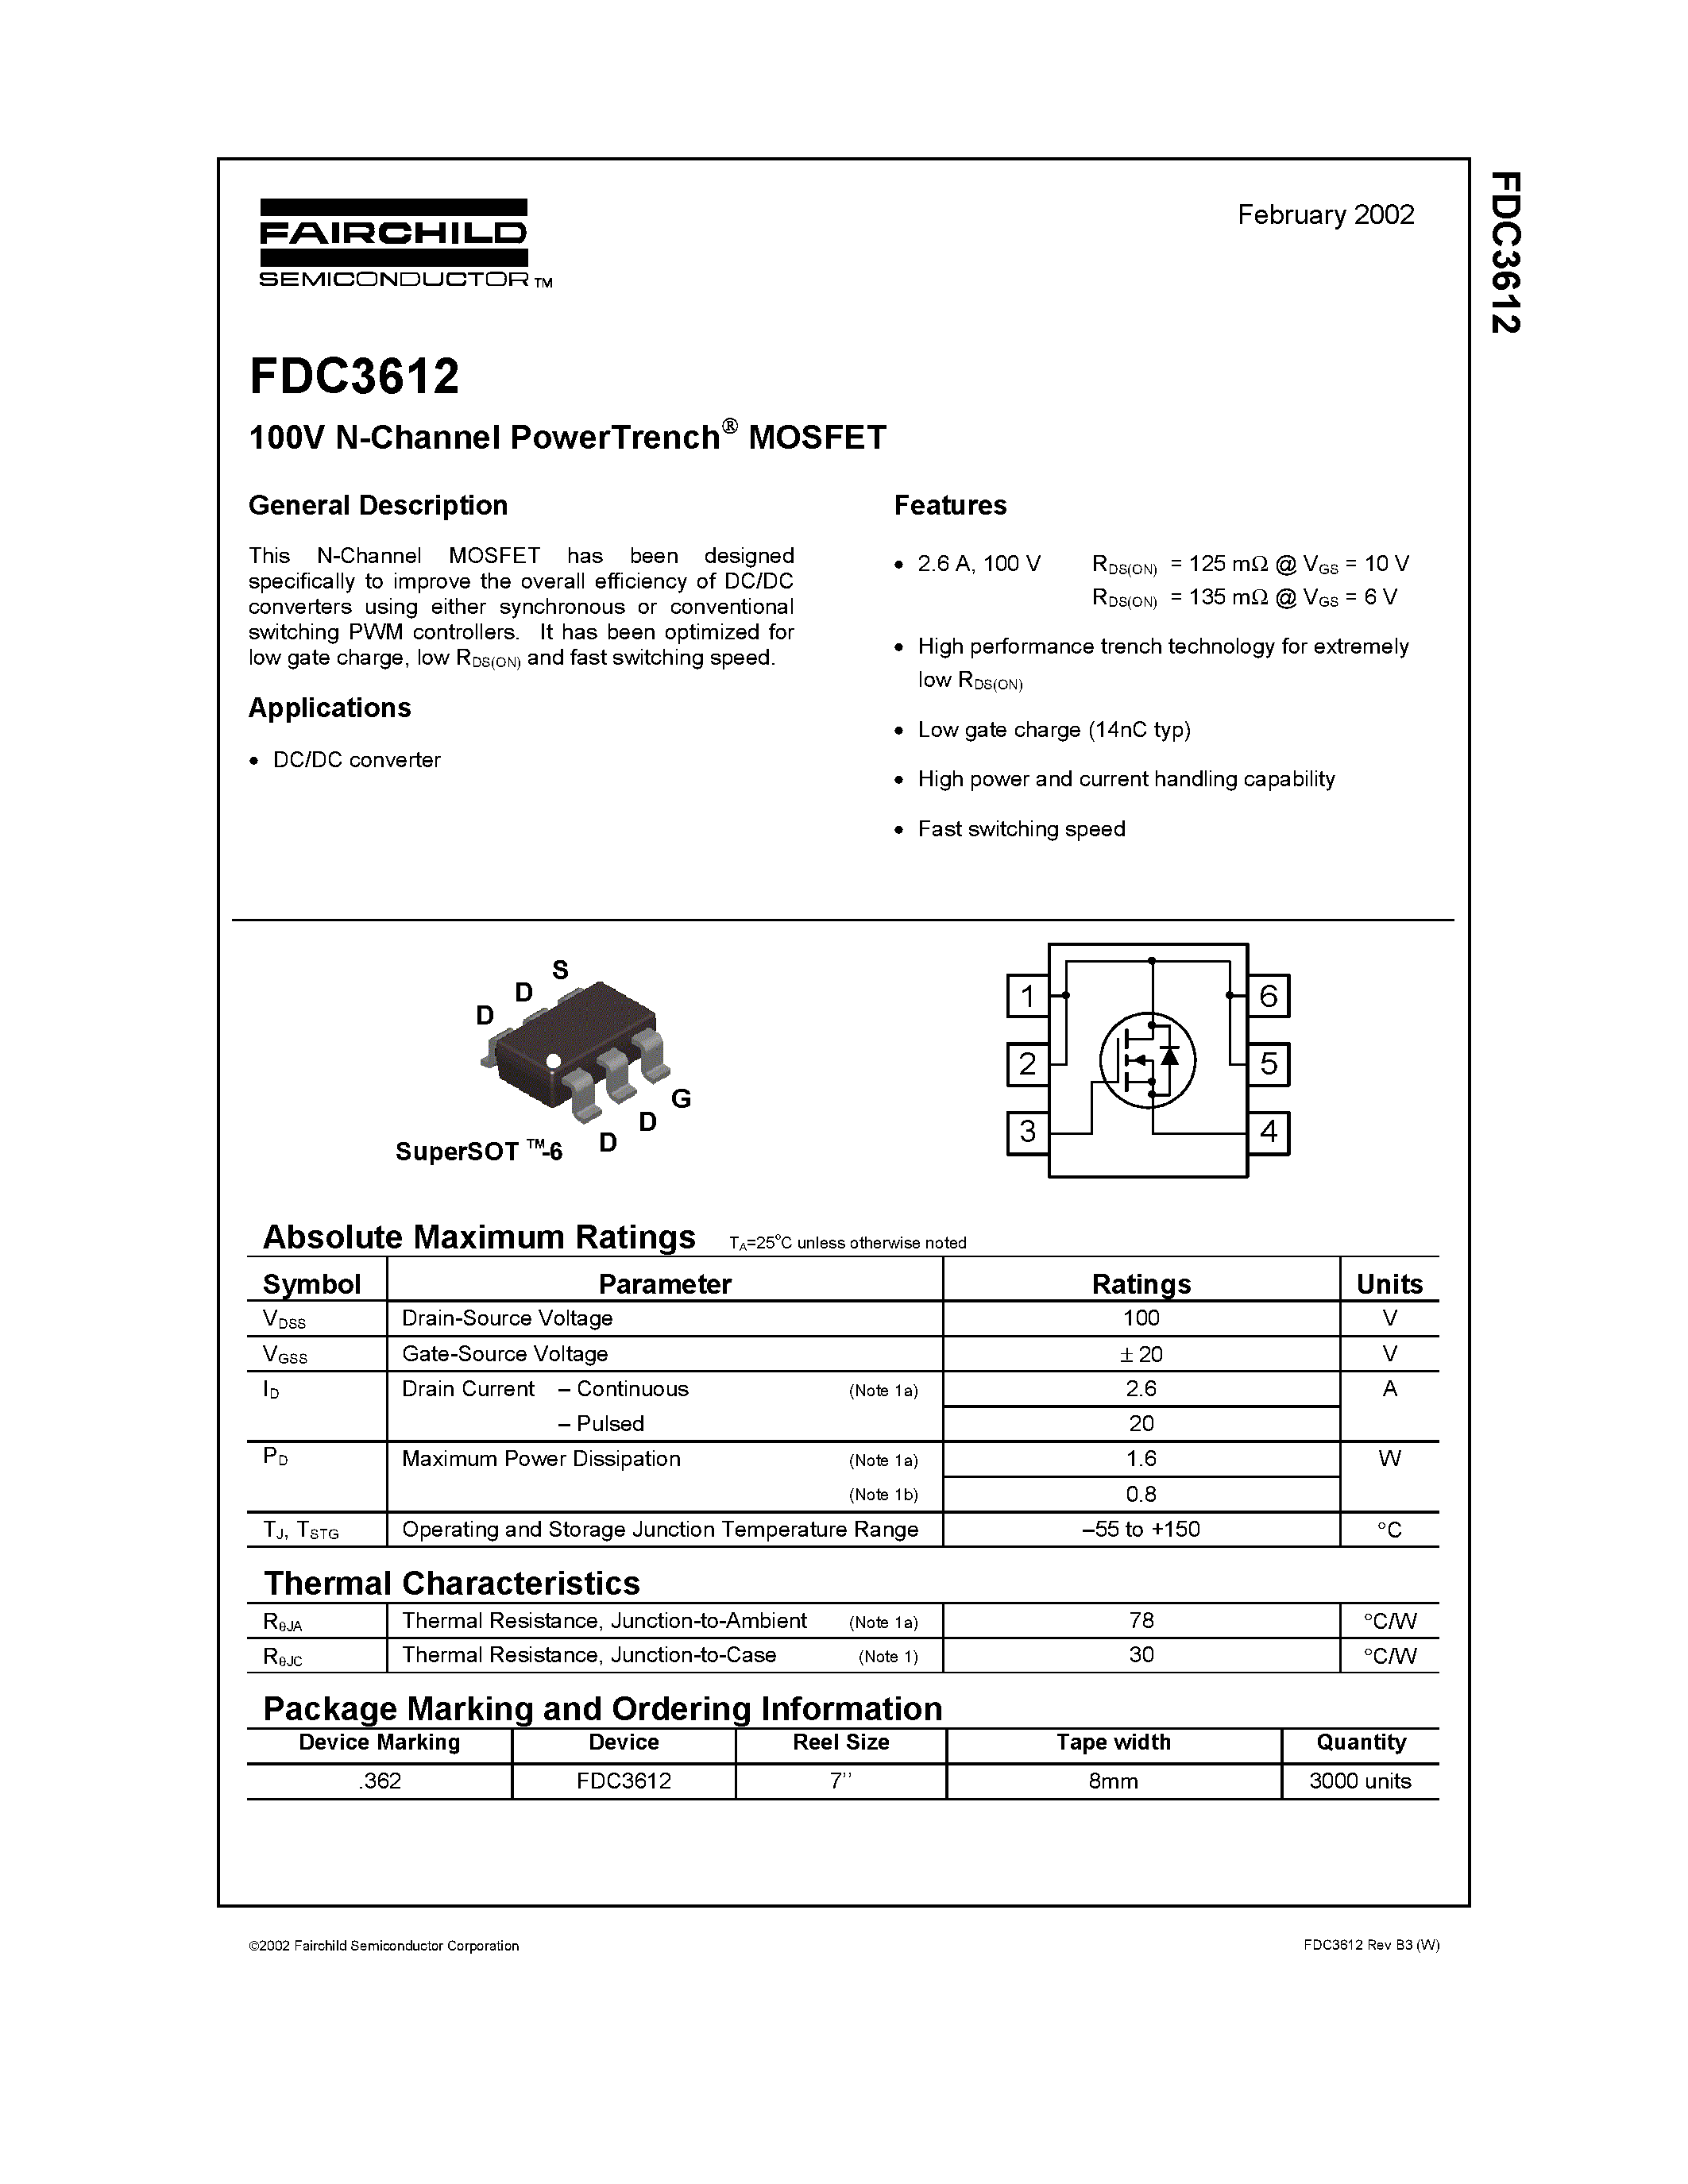 Даташит FDC3612 - 100V N-Channel PowerTrench MOSFET страница 1